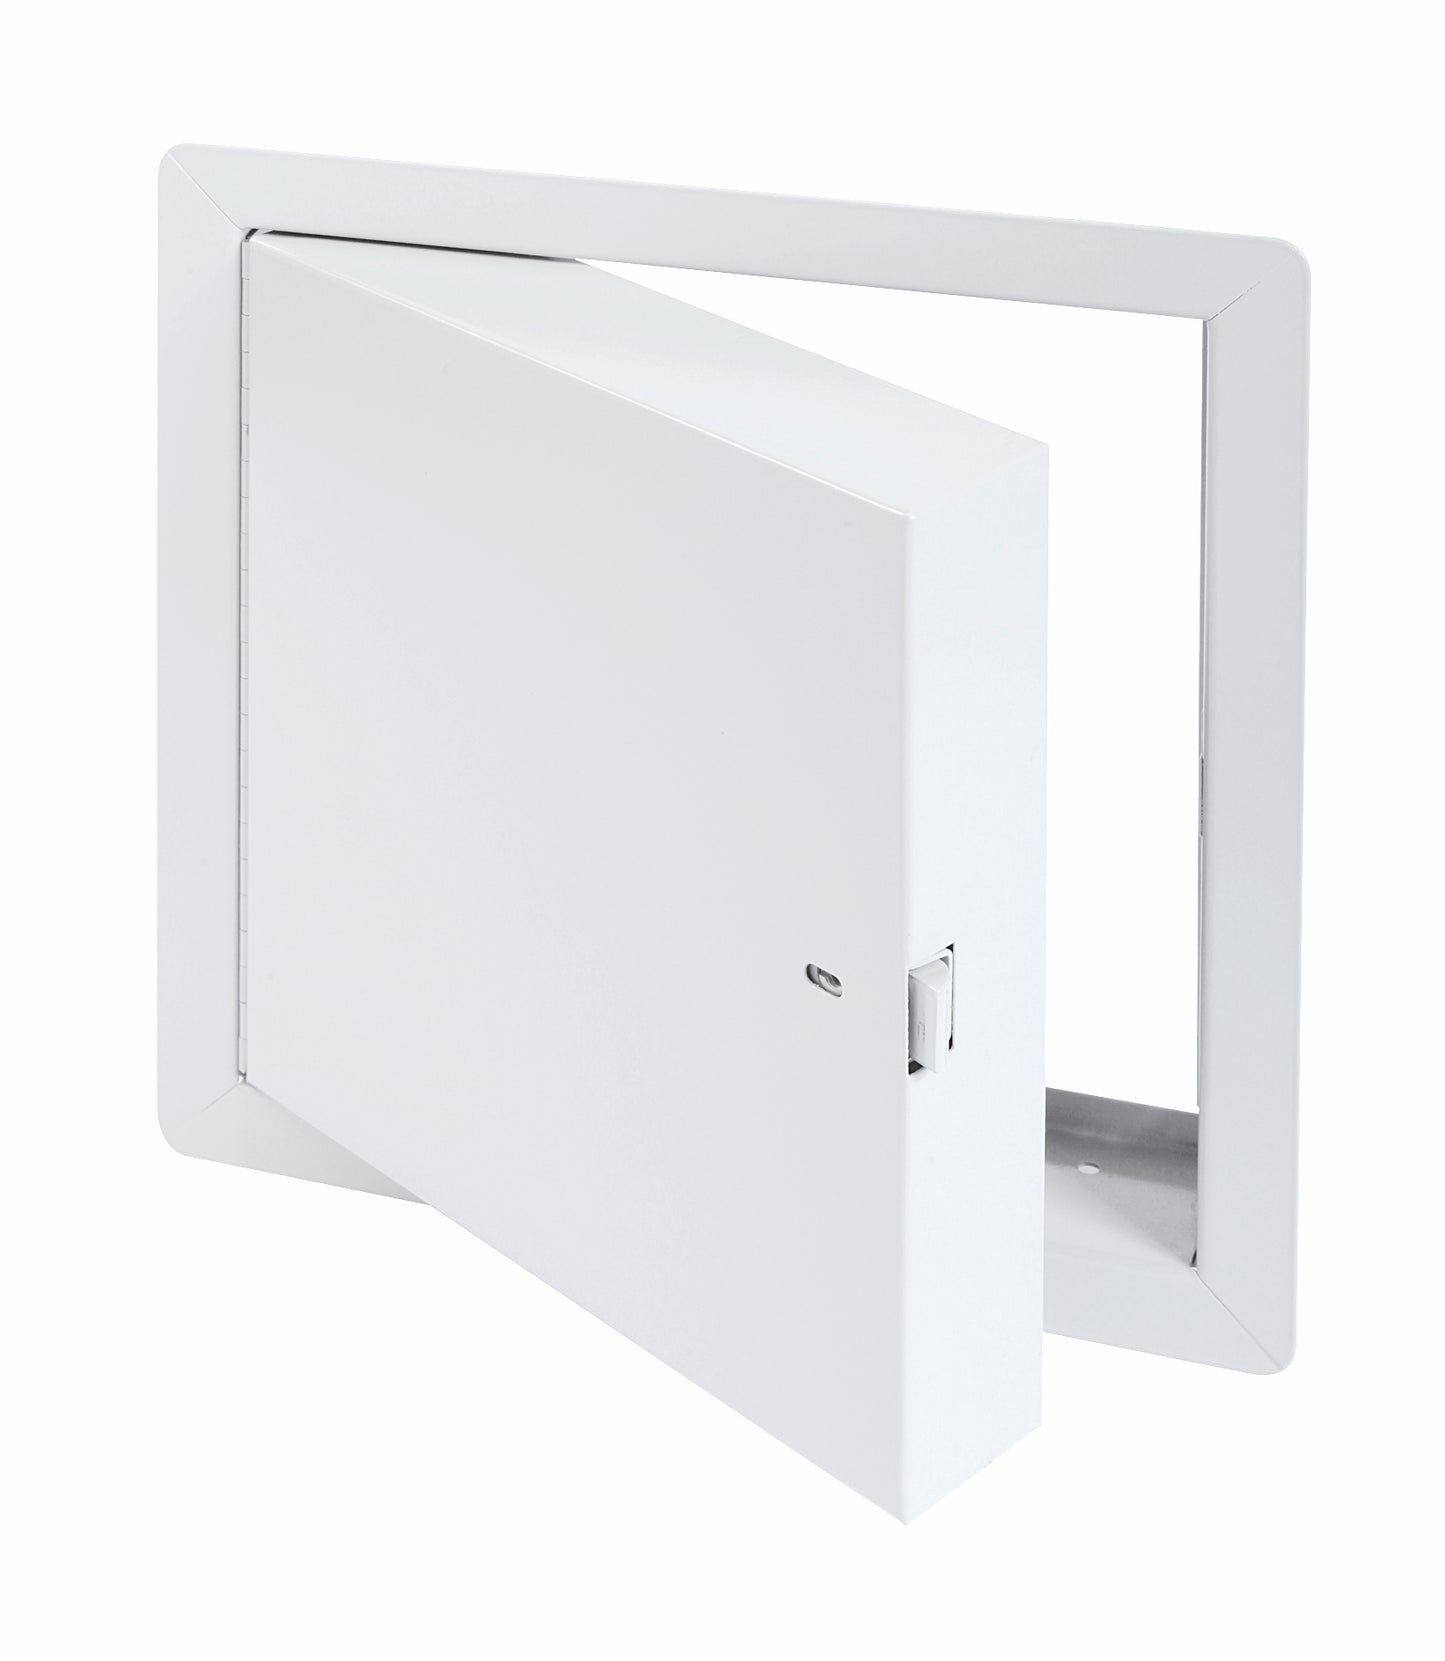 16"x16" Fire-rated Insulated Access Door with Exposed Flange, Cendrex